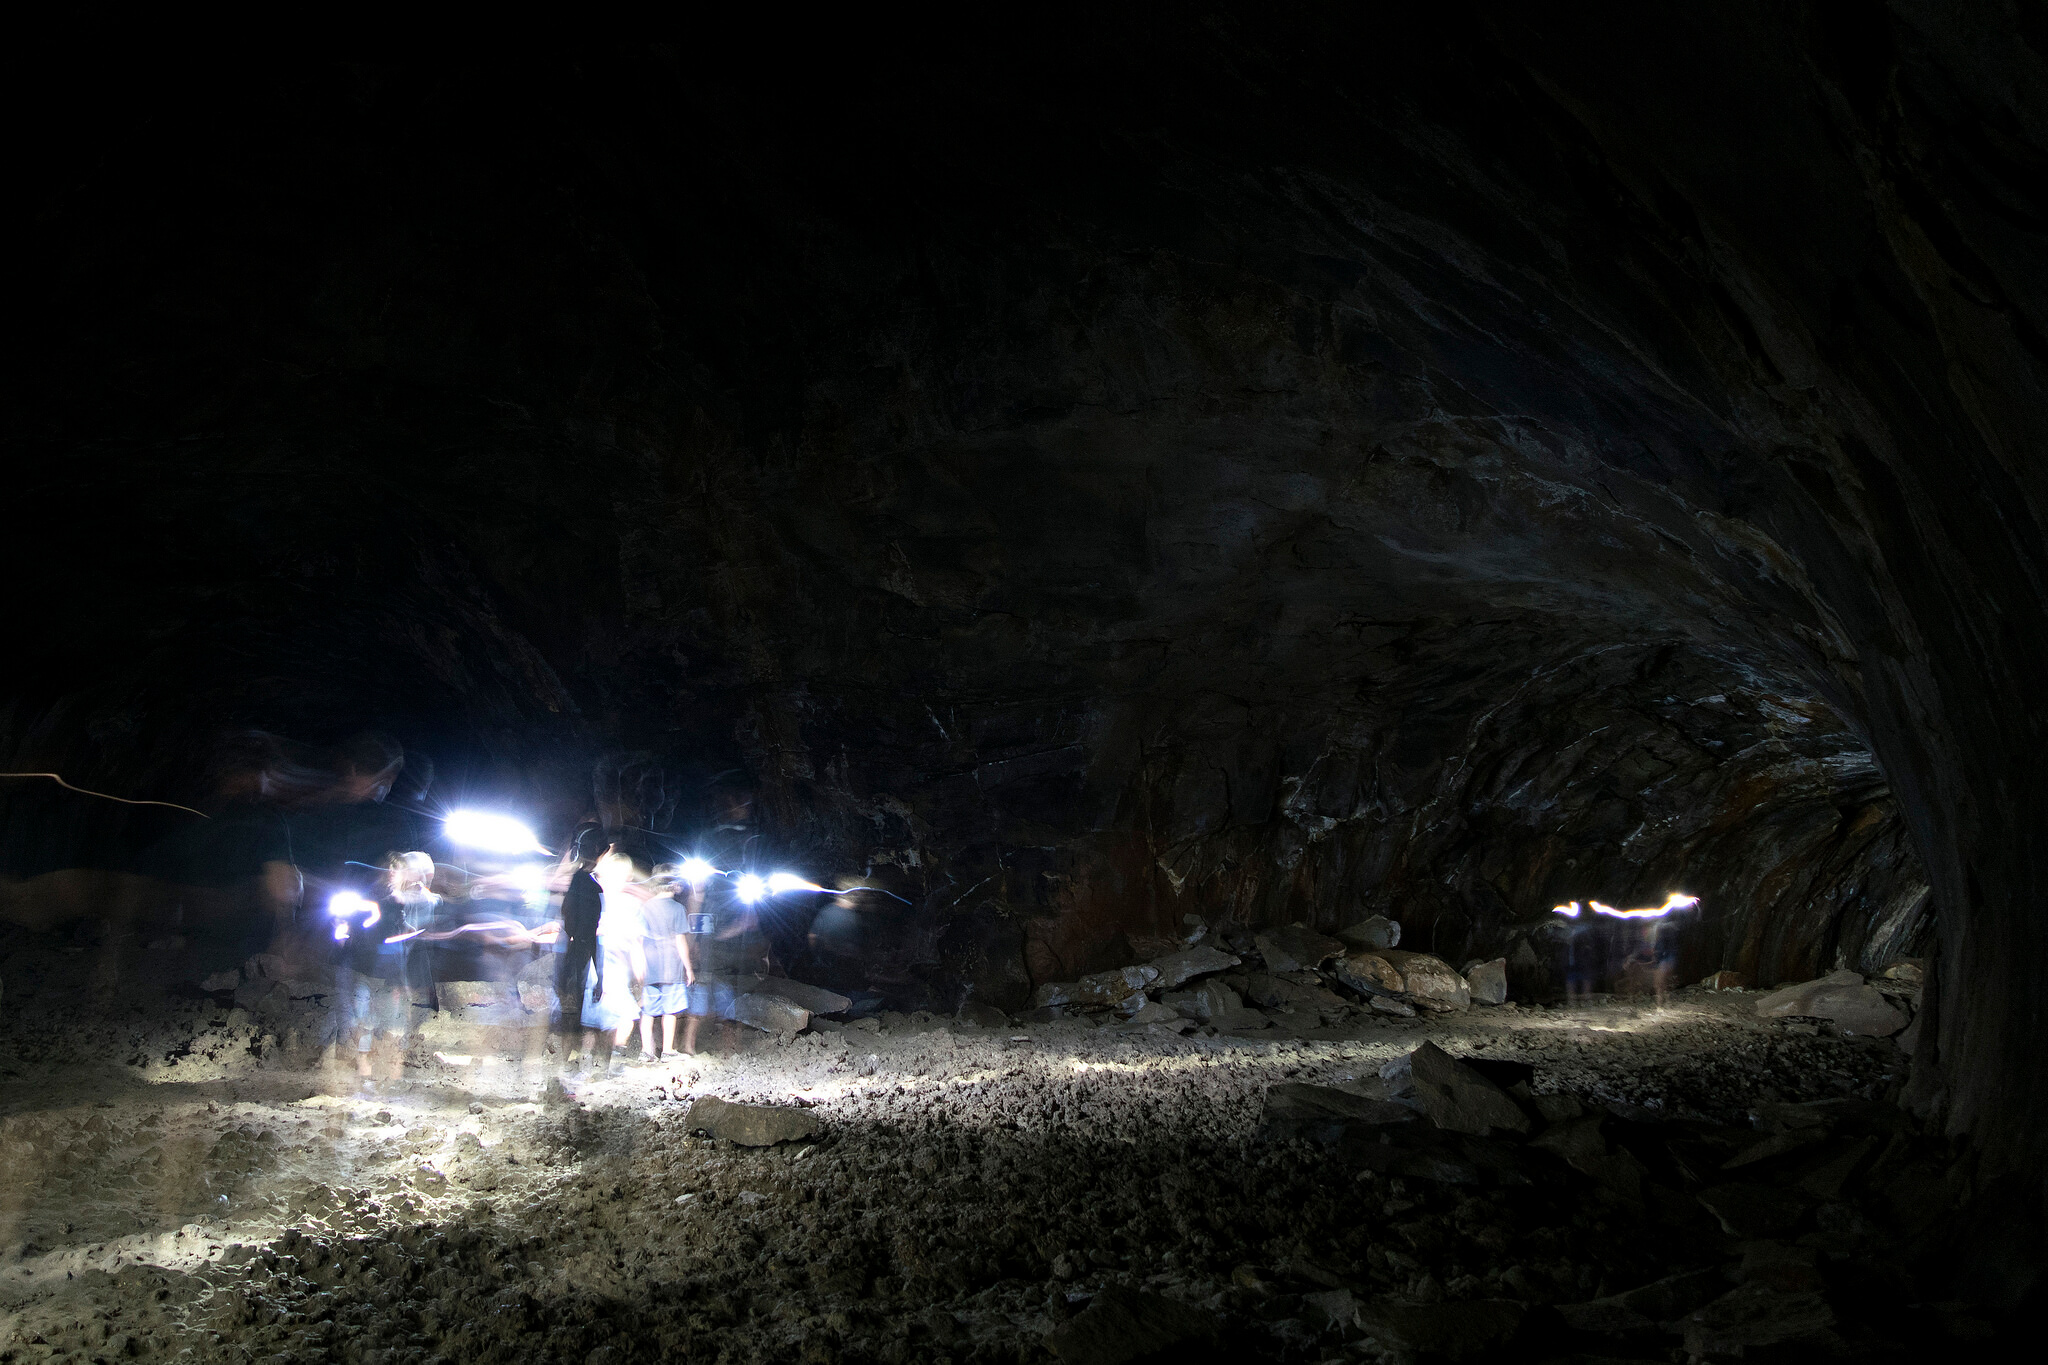 Interior of the Lava River Cave in Arizona. People are spelunking with artificial lighting.
Flickr USer Nicholas Schnur